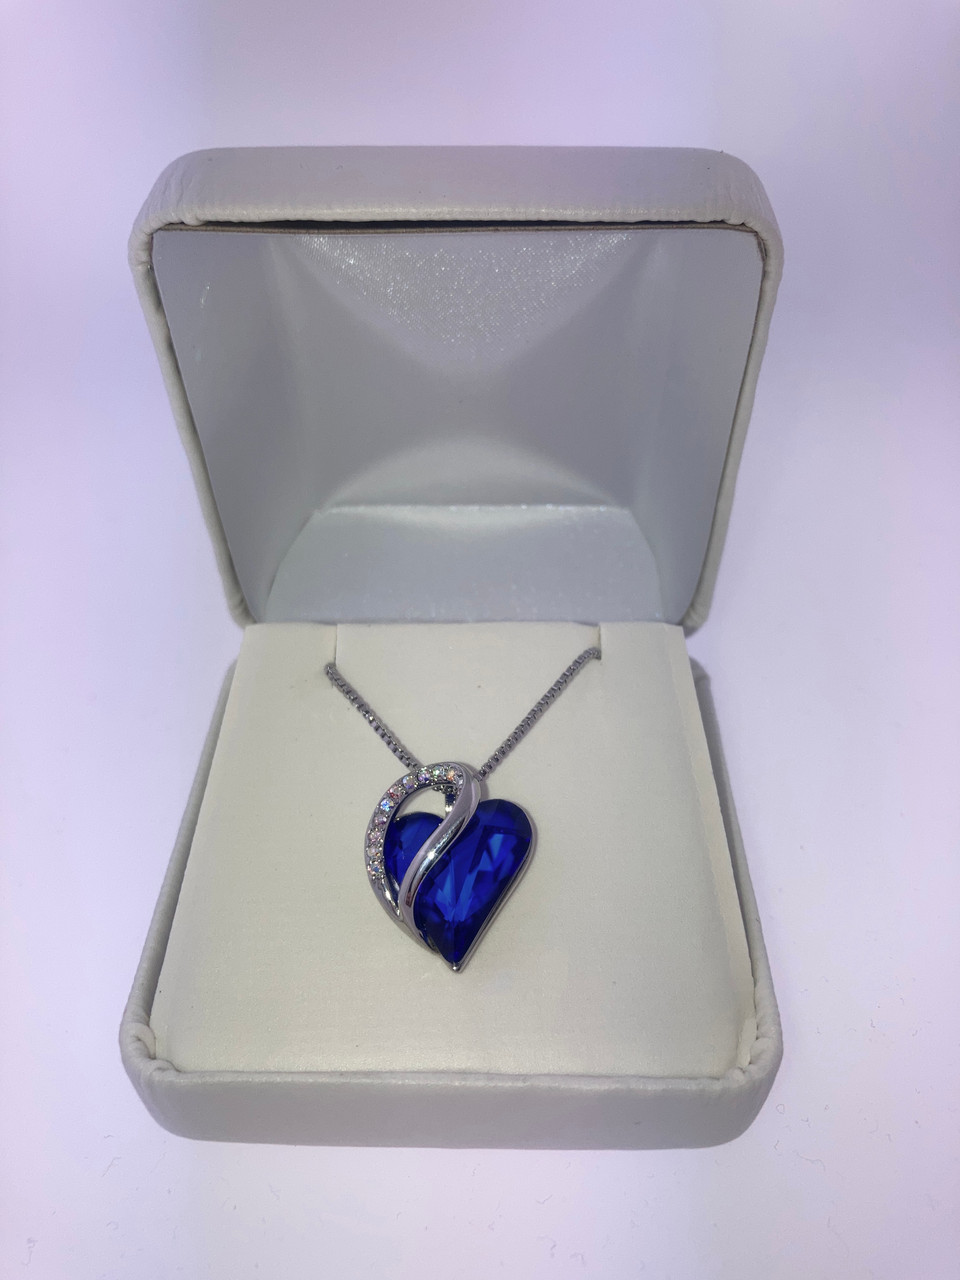 Lapis Lazuli - Dark Blue Crystal Looped Heart Design Crystal Pendant and CZ stones - with 18" Chain Necklace. Gift for Lover, Girl Friend, Wife, Valentine's Day Gift, Mother's Day, Anniversary Gift Wisdom Heart Necklace.